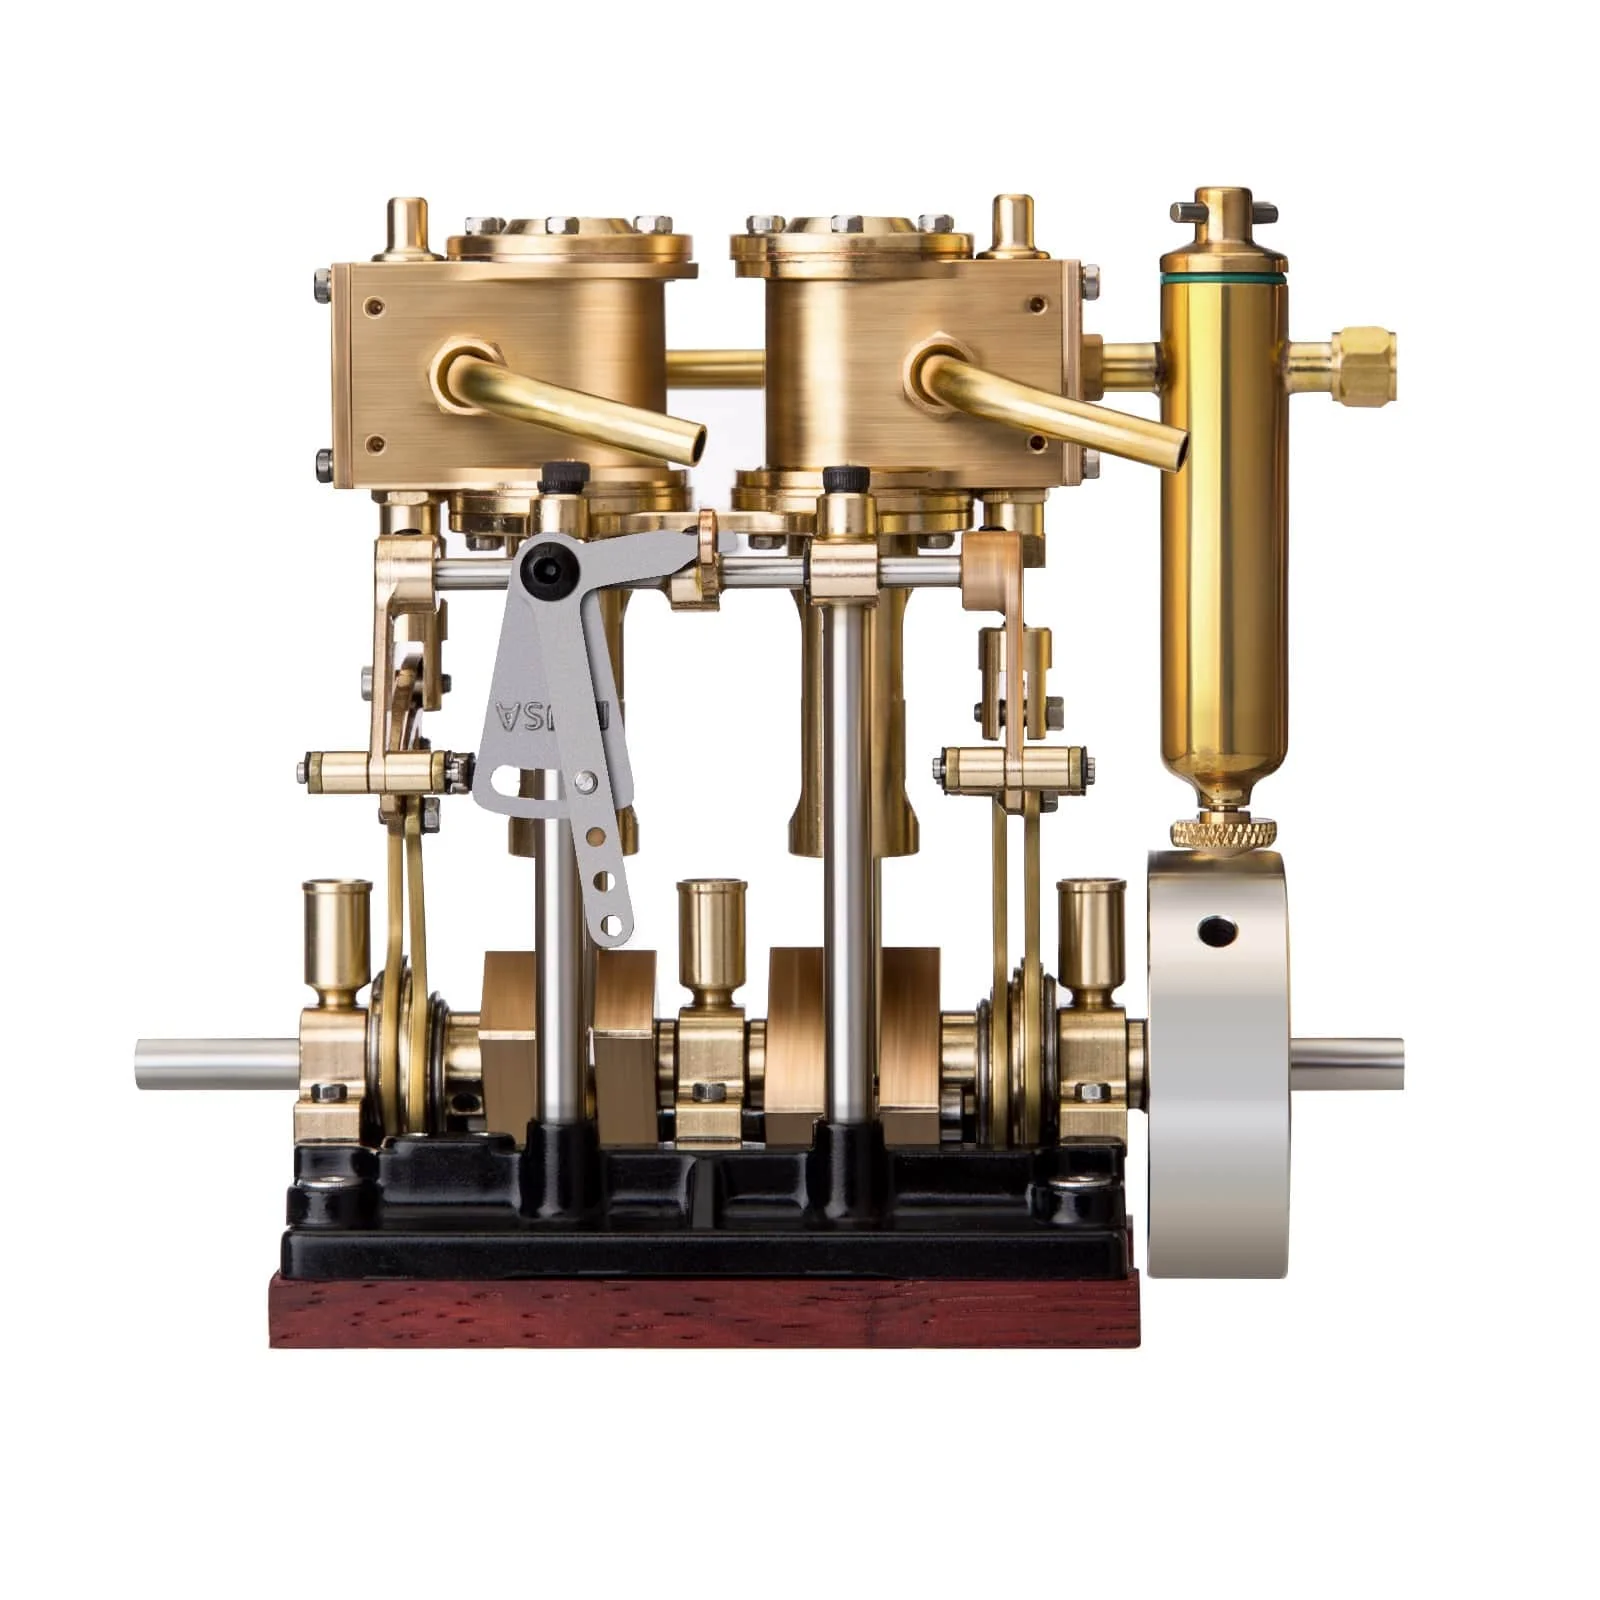 KACIO LS2-13S Two Cylinder Reciprocating Steam Engine Model for 80-120CM Steamship 2